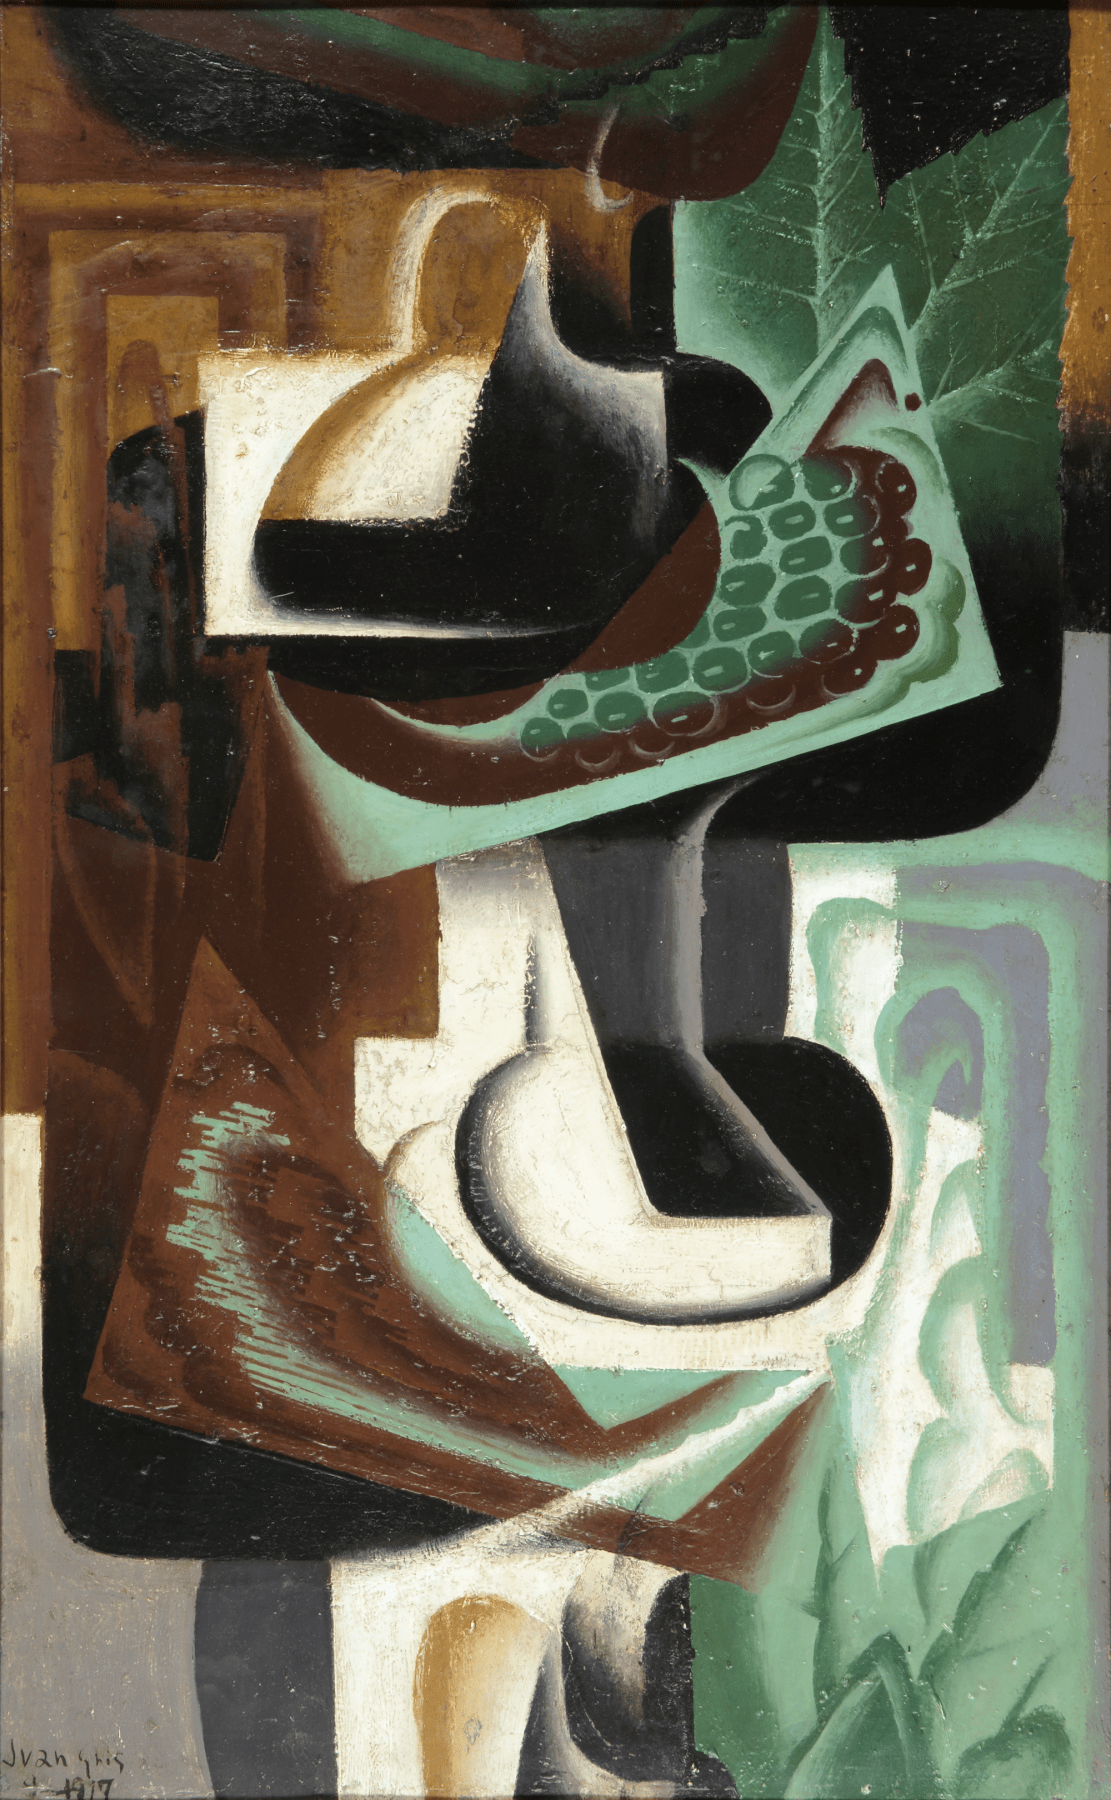 Juan Gris, La Grappe de Raisin, 1917 Oil on panel 61 x 38 cm. (24 x 15 in.) This painting represents in a cubist manner grapesin green, white, black